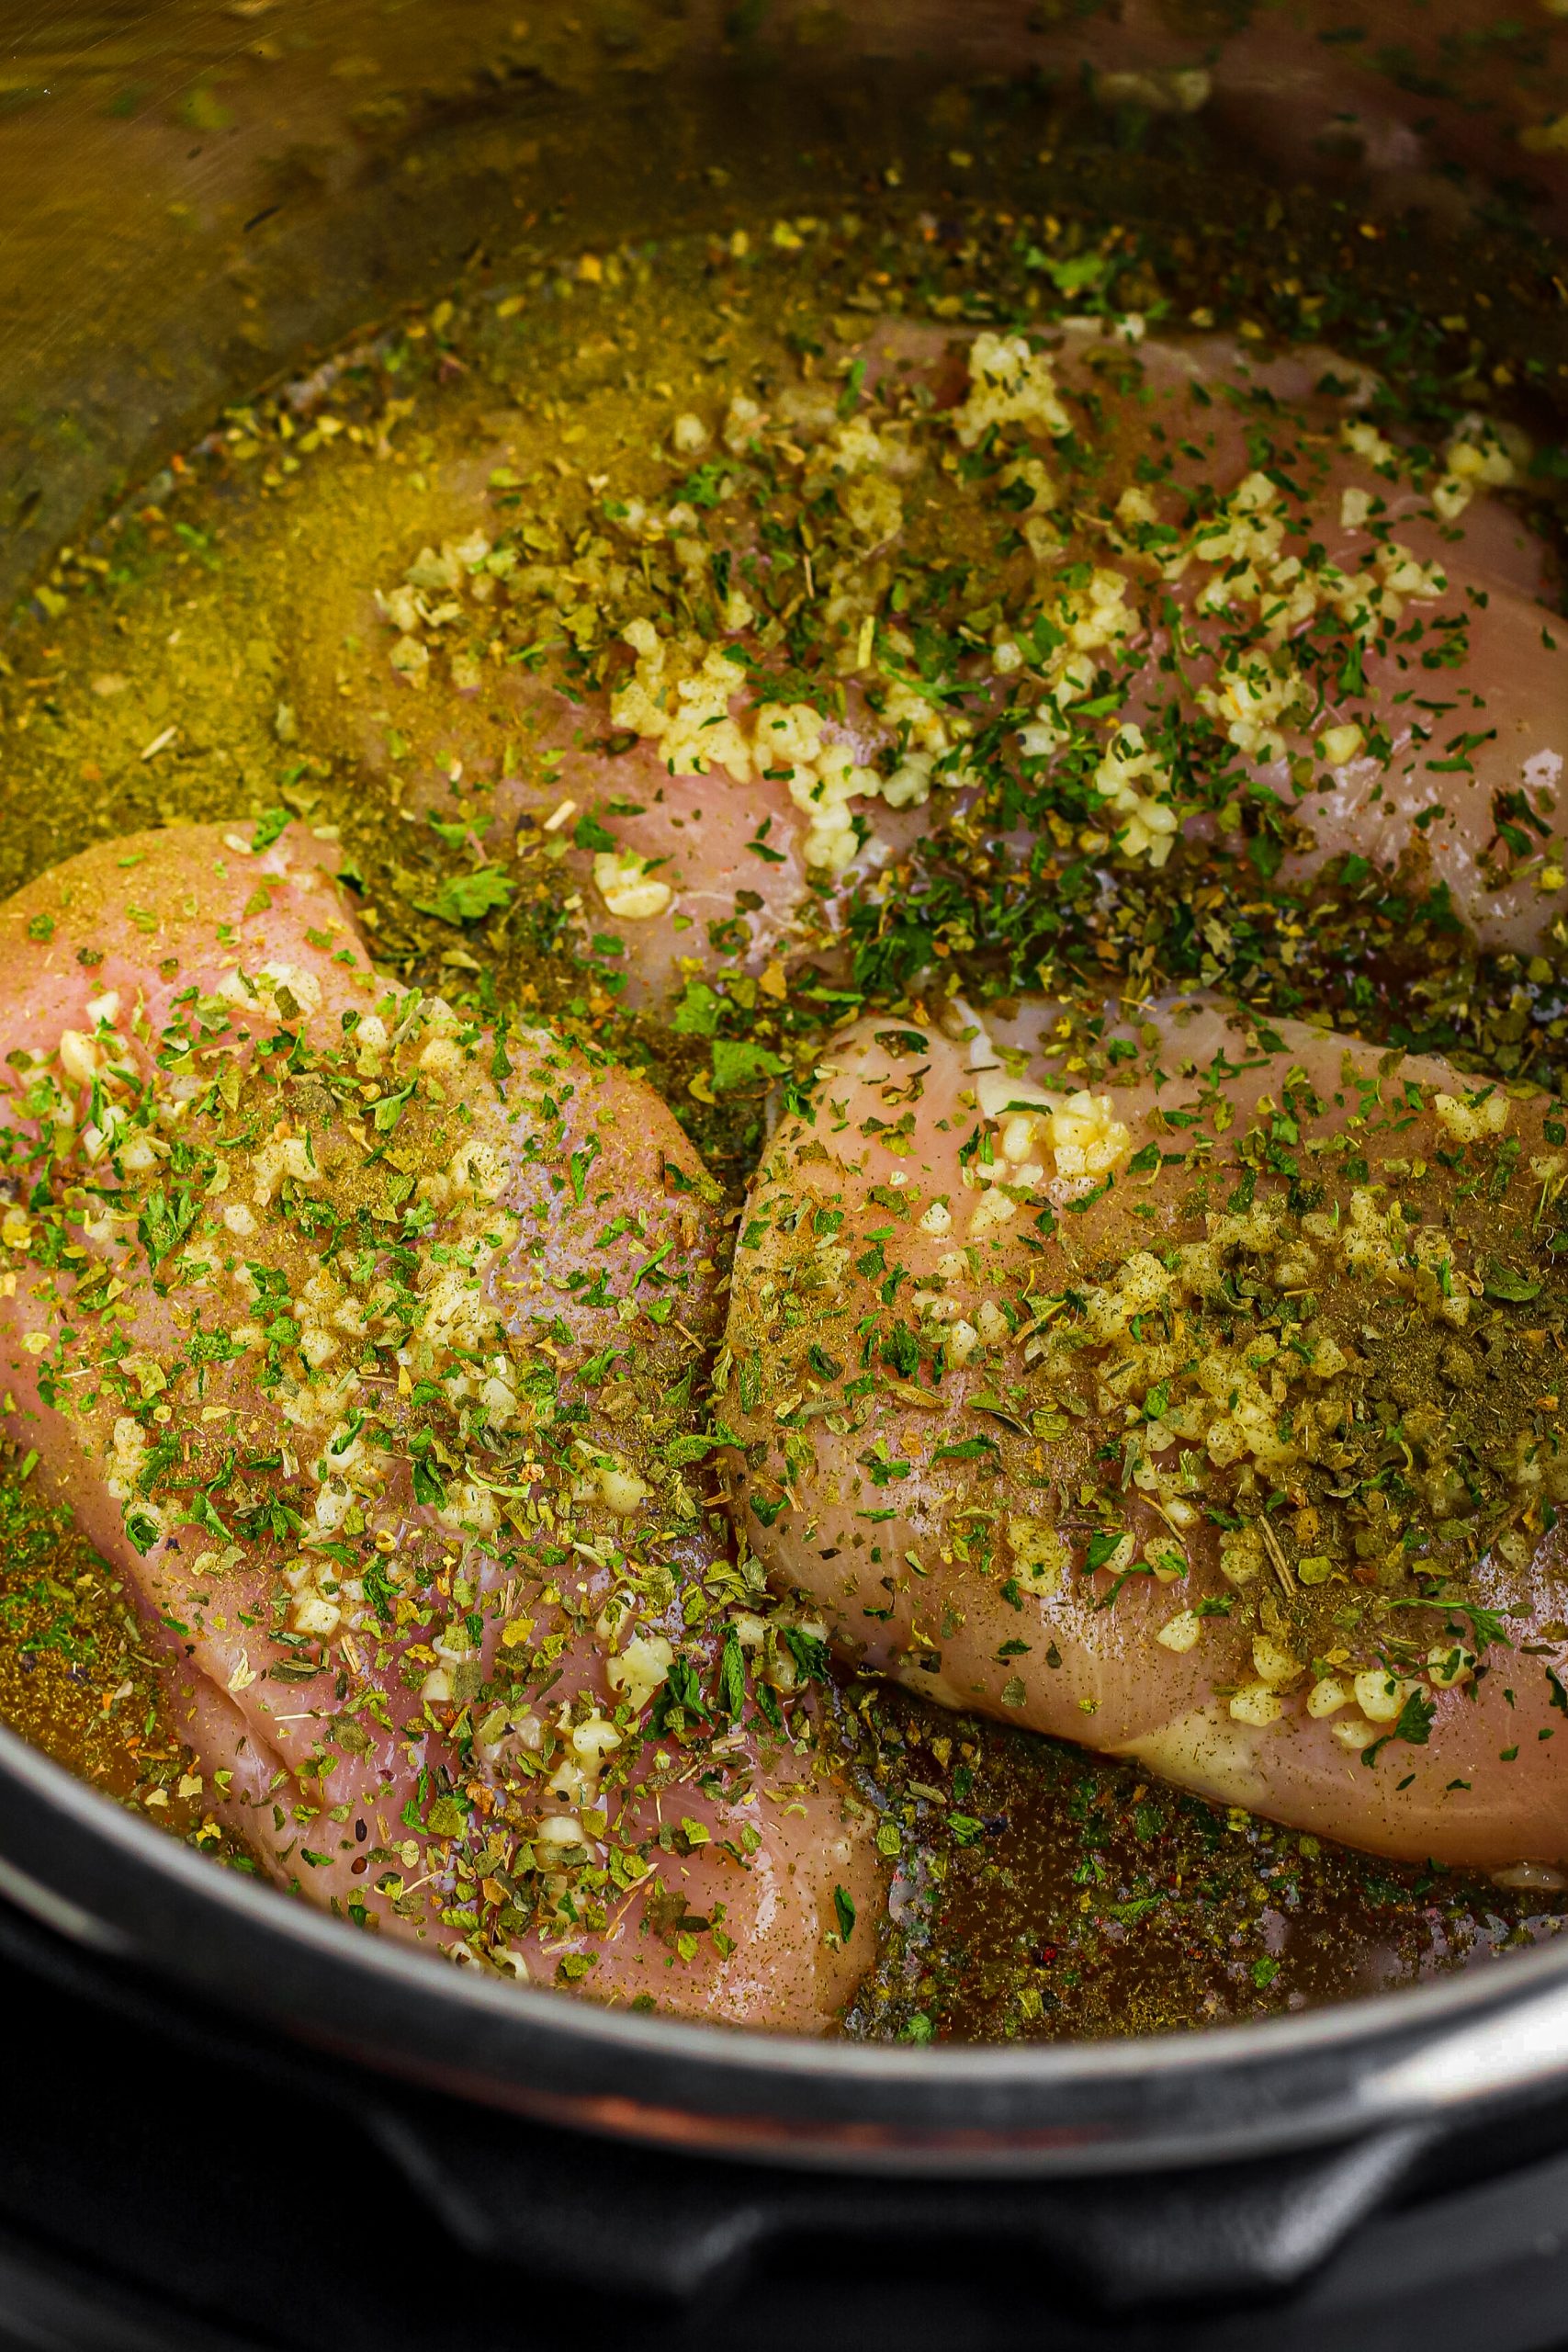 Place the chicken breasts on top of the rice. Season with minced garlic, remaining Italian seasoning, and parsley.